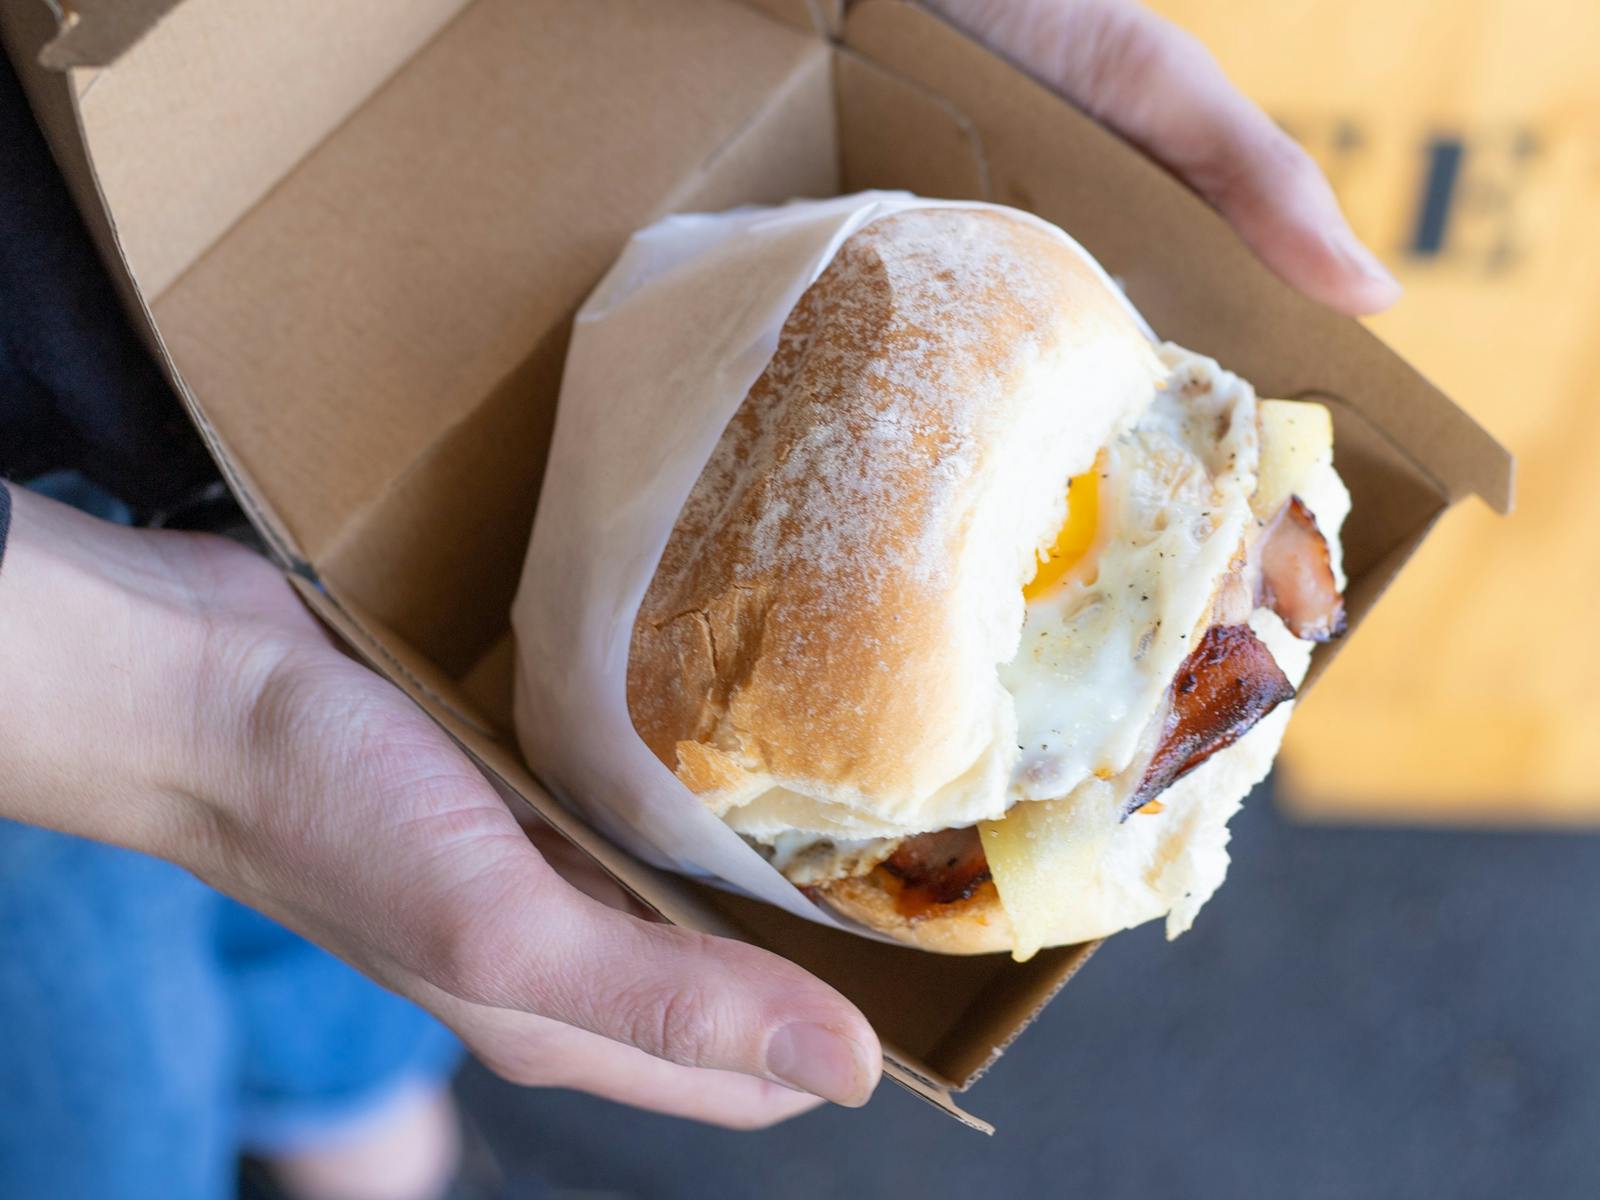 A small brown box held open with an egg and bacon soft bap roll inside